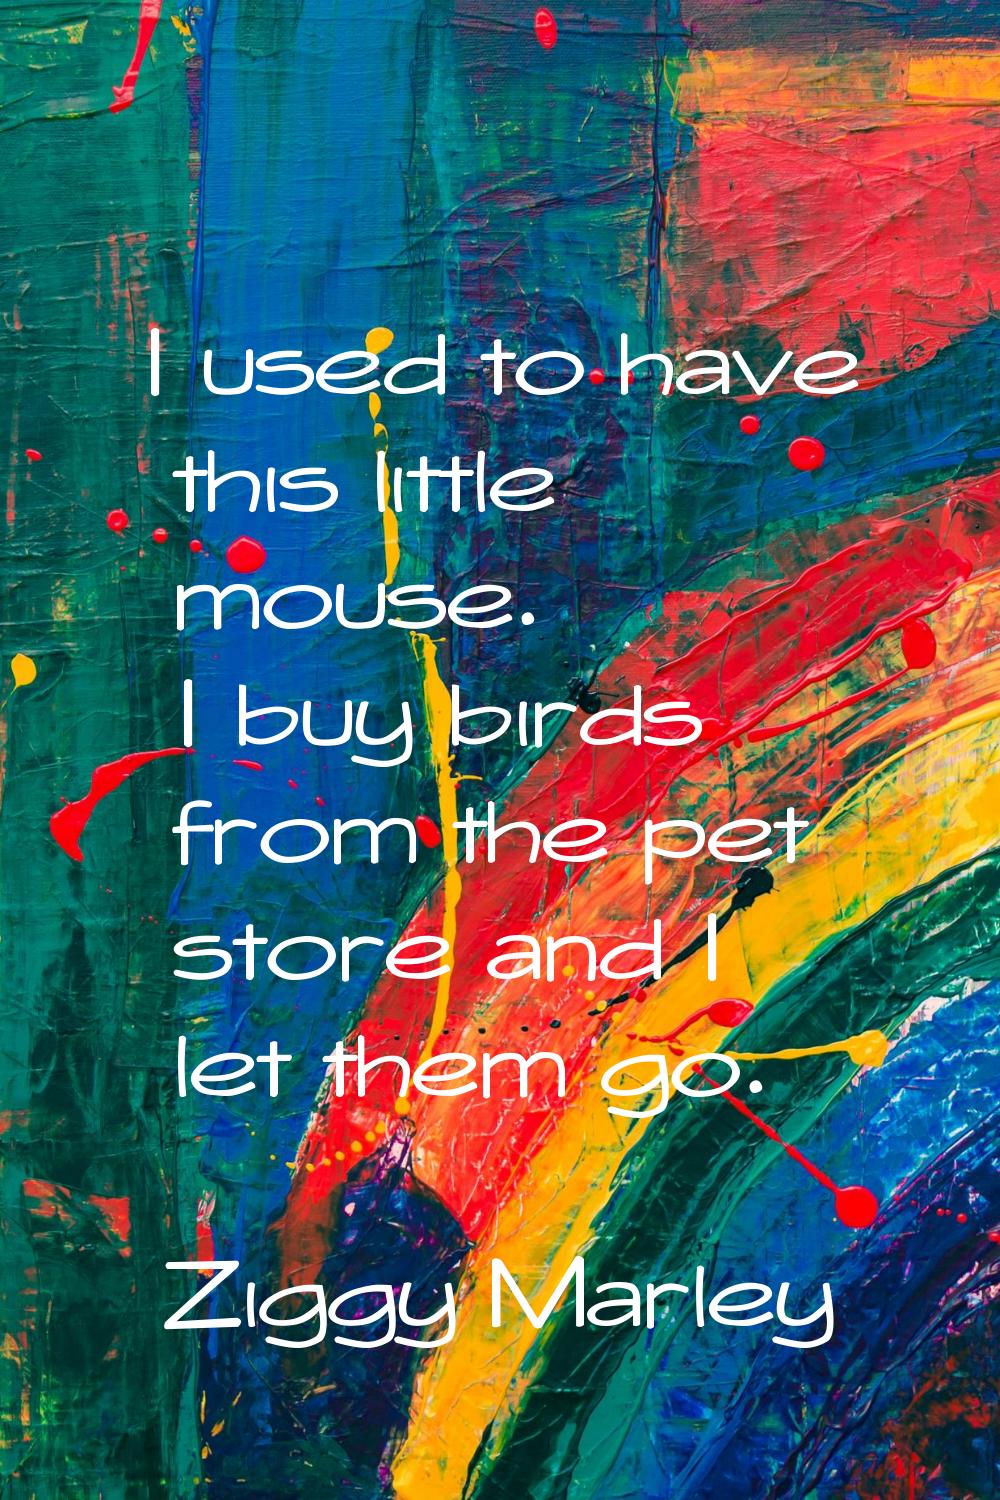 I used to have this little mouse. I buy birds from the pet store and I let them go.